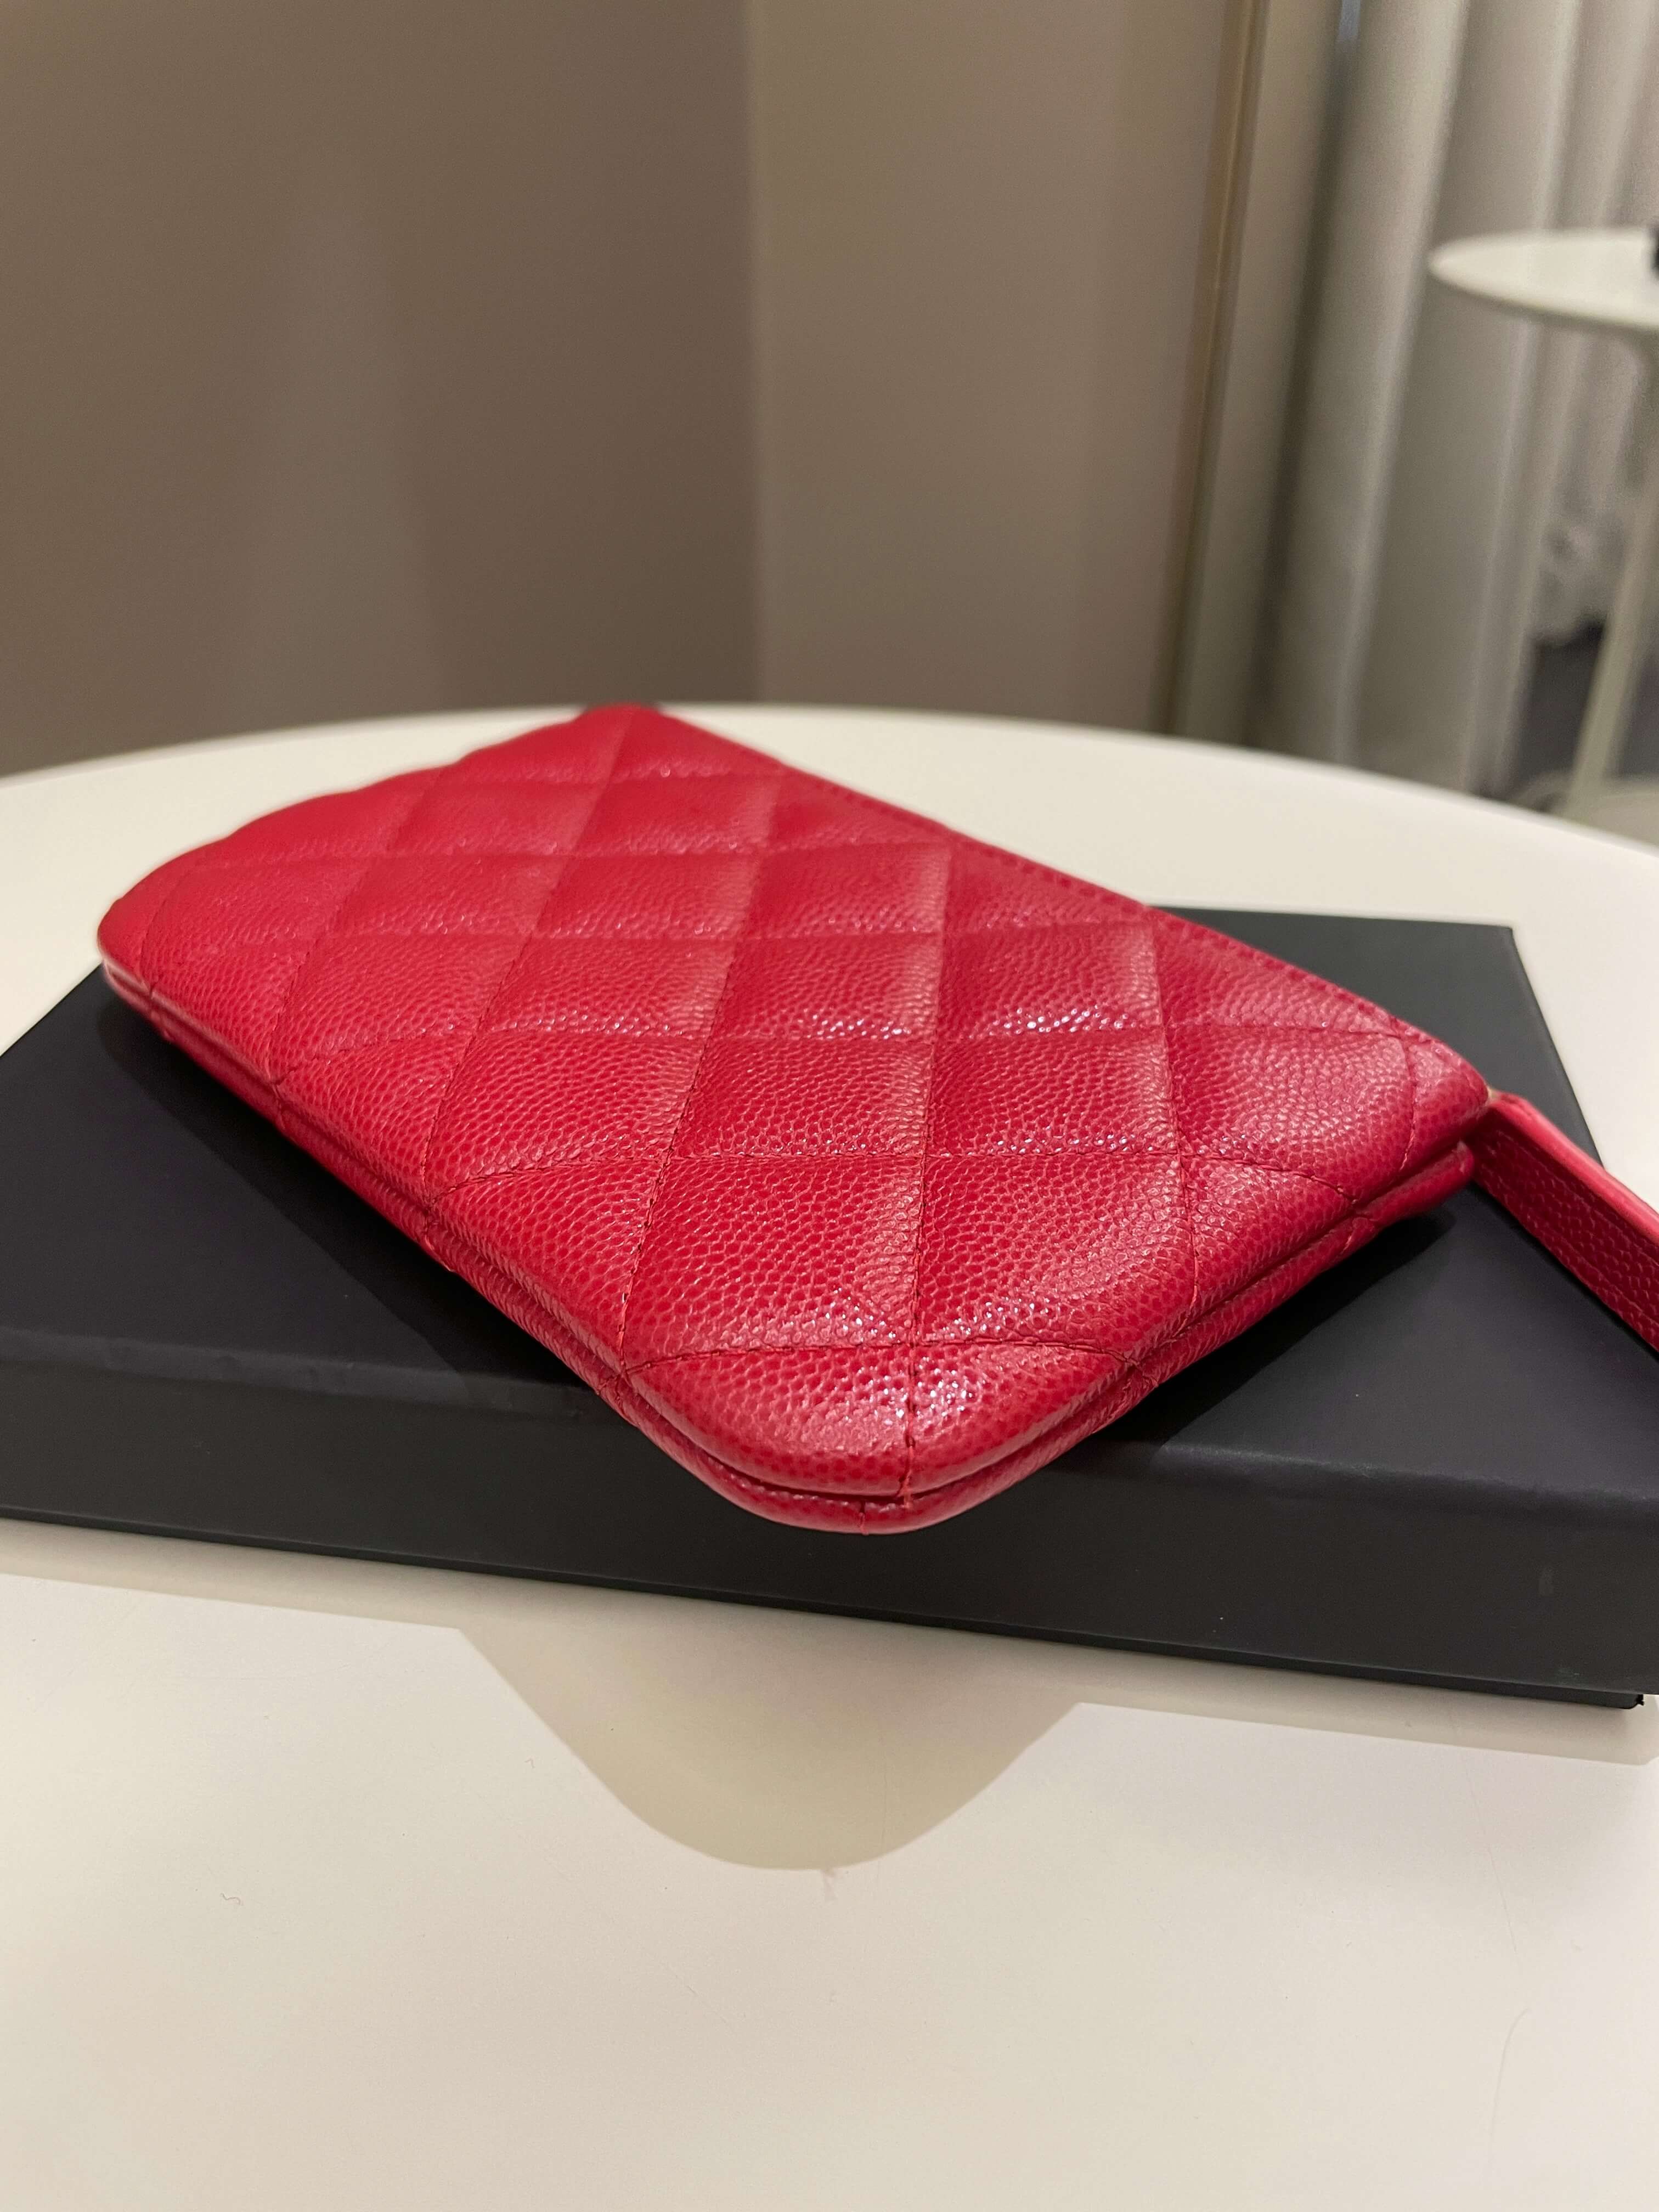 Chanel Classic Quilted Mini OCase
Red Caviar